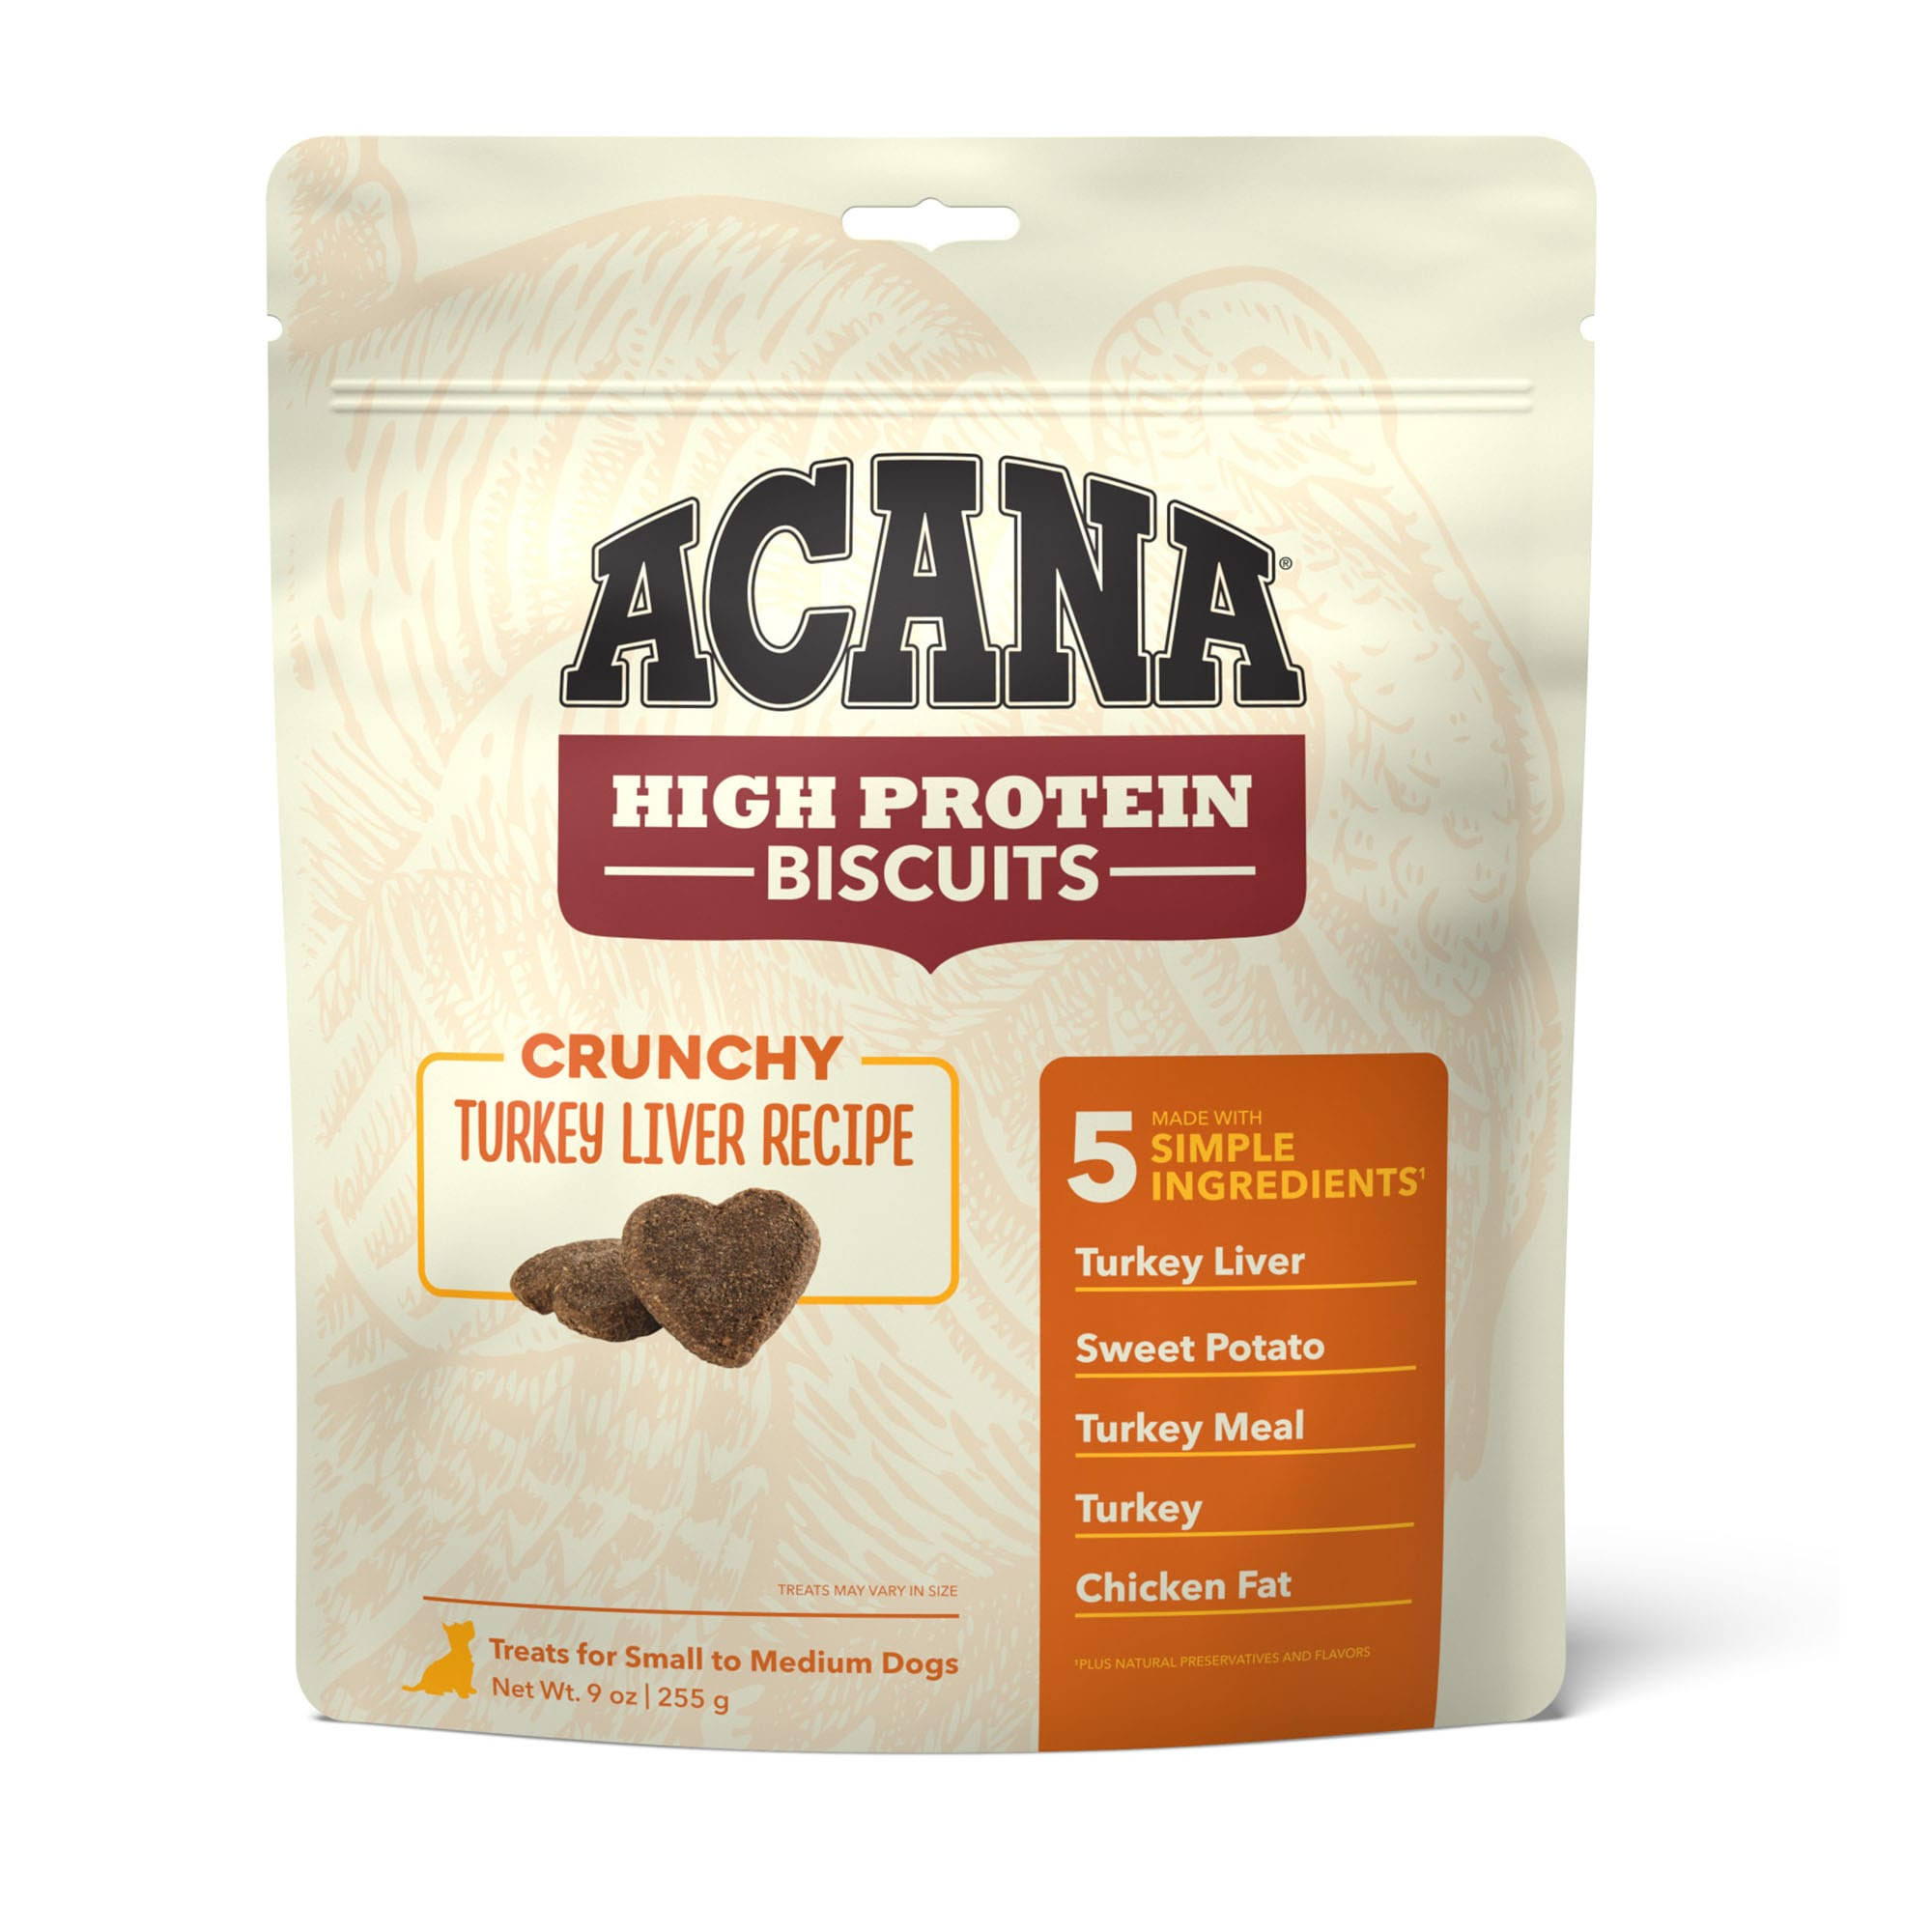 Acana Crunchy Biscuits Dog Treats, Turkey Liver Recipe, High Protein, Small Breed, 9 Ounce